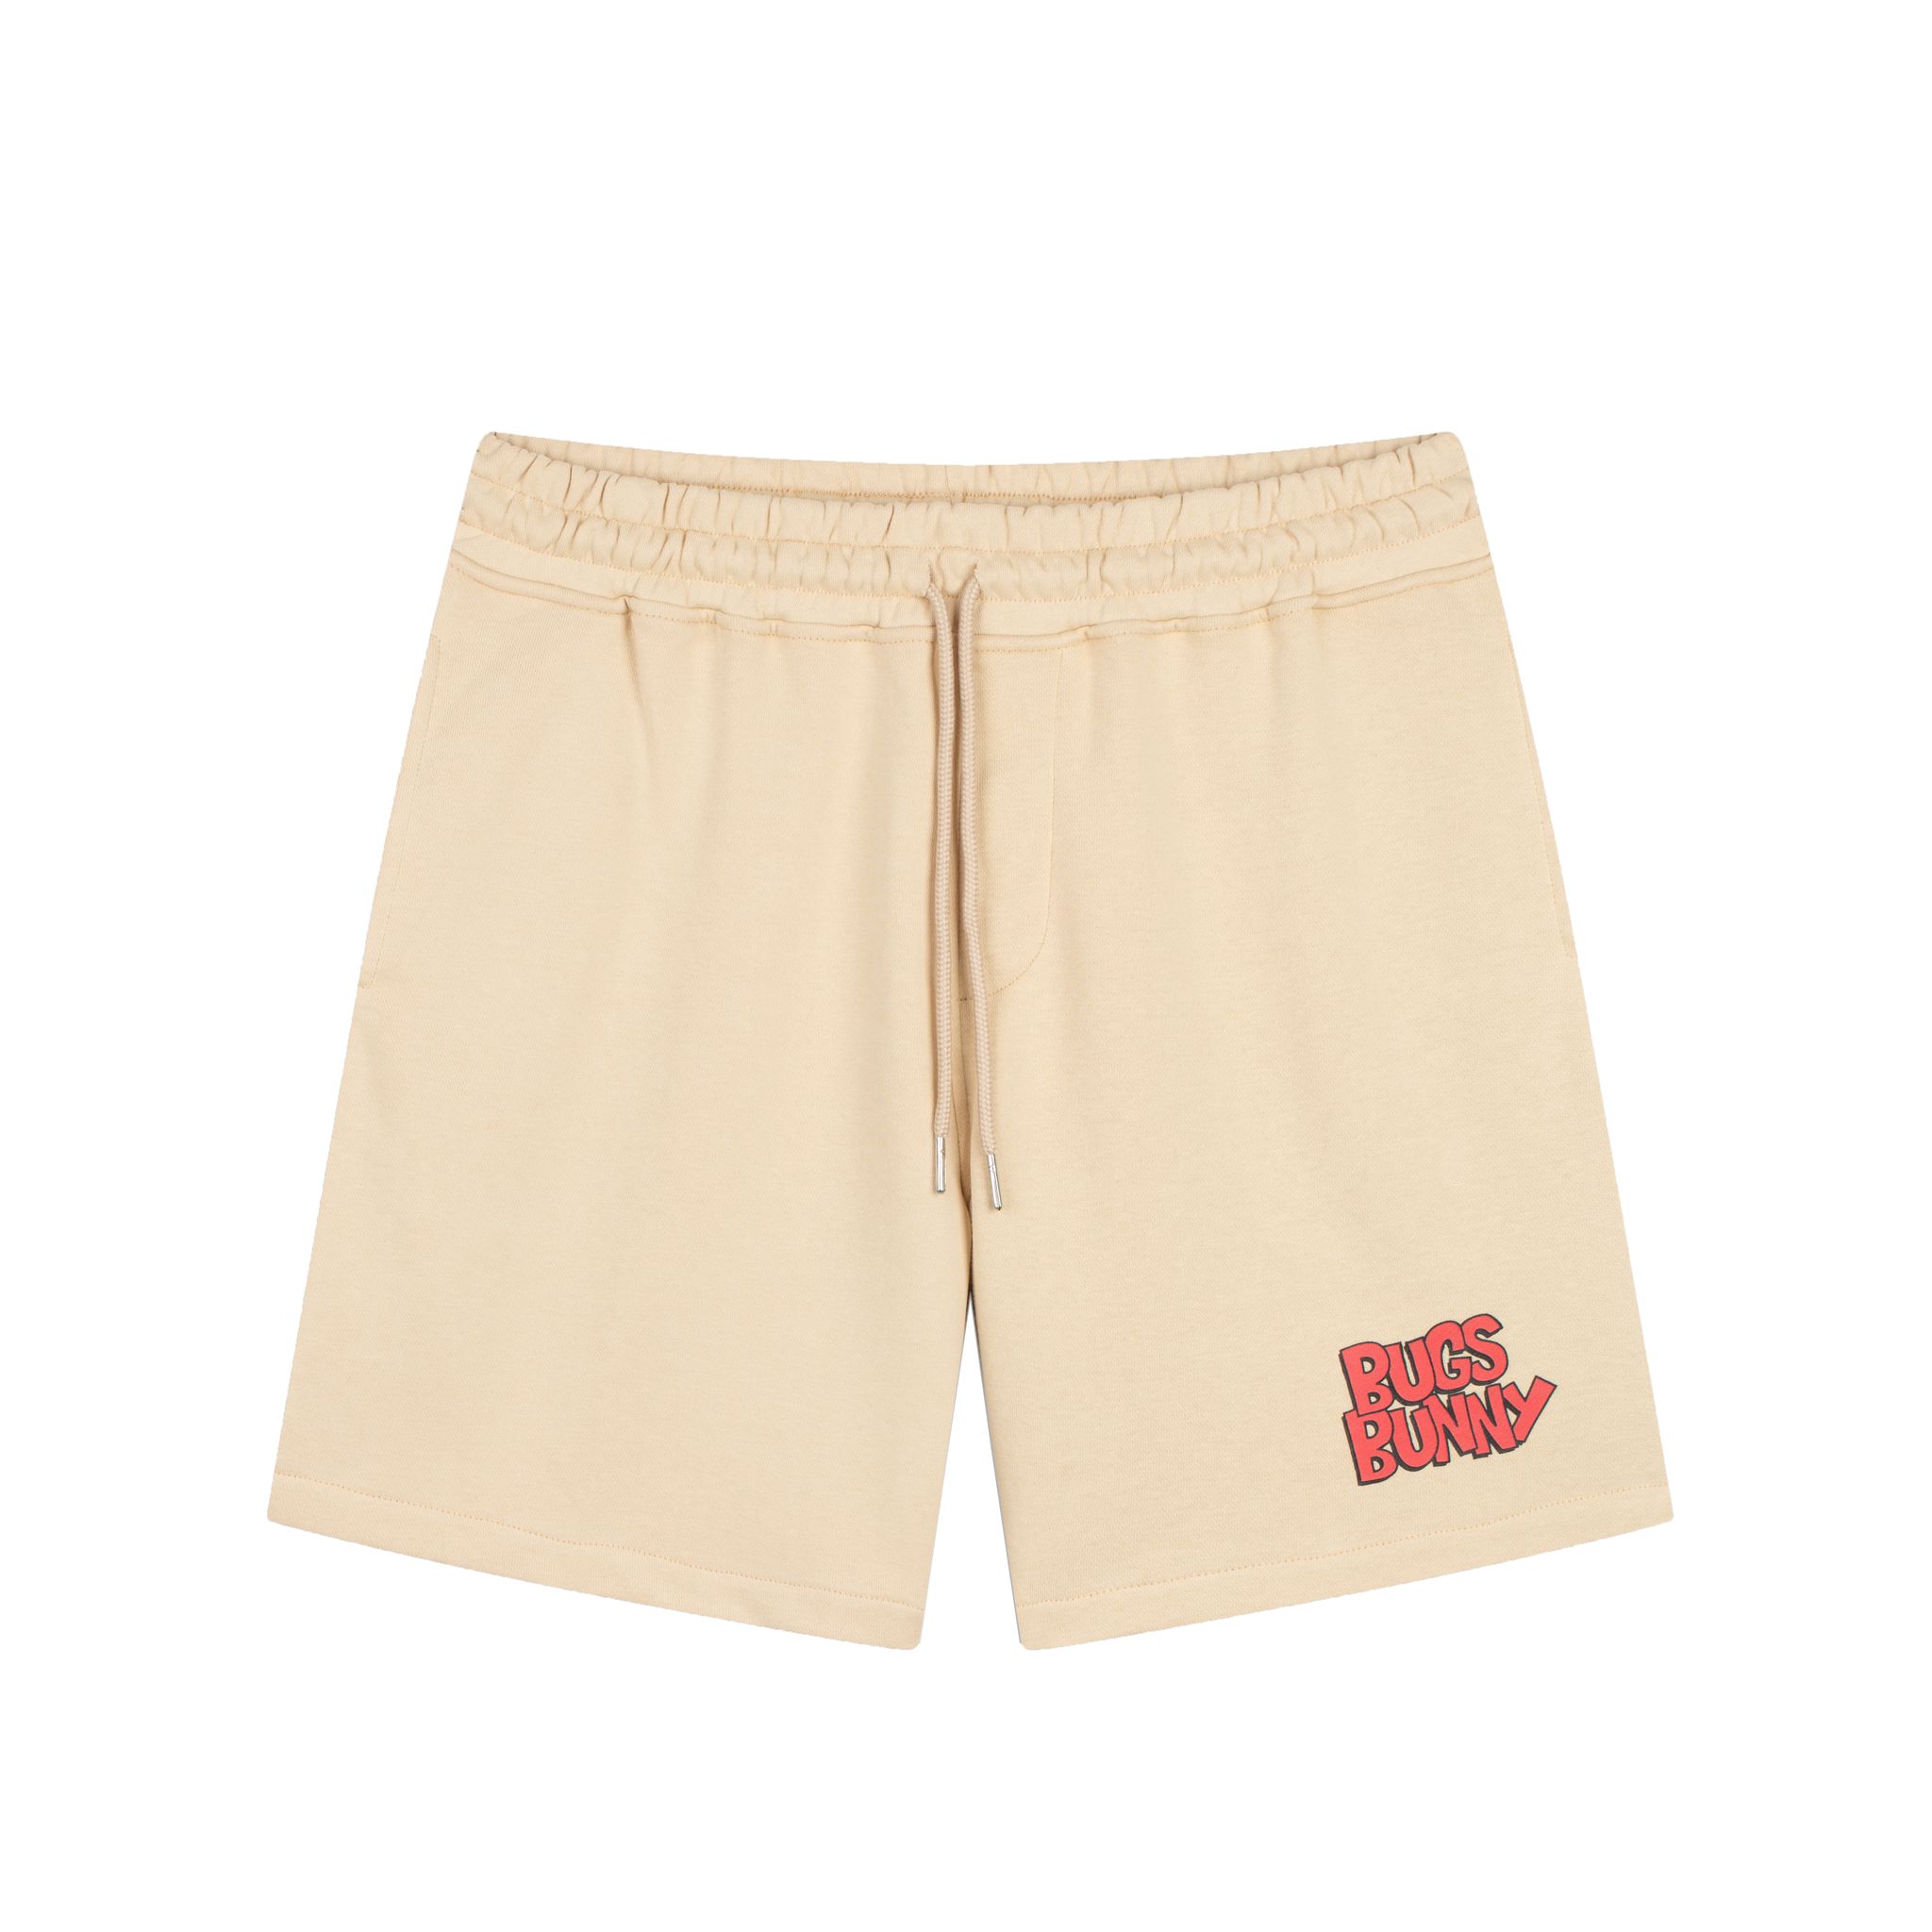 BUGS BUNNY SHORT – BEIGE - Mikenco® Official Site